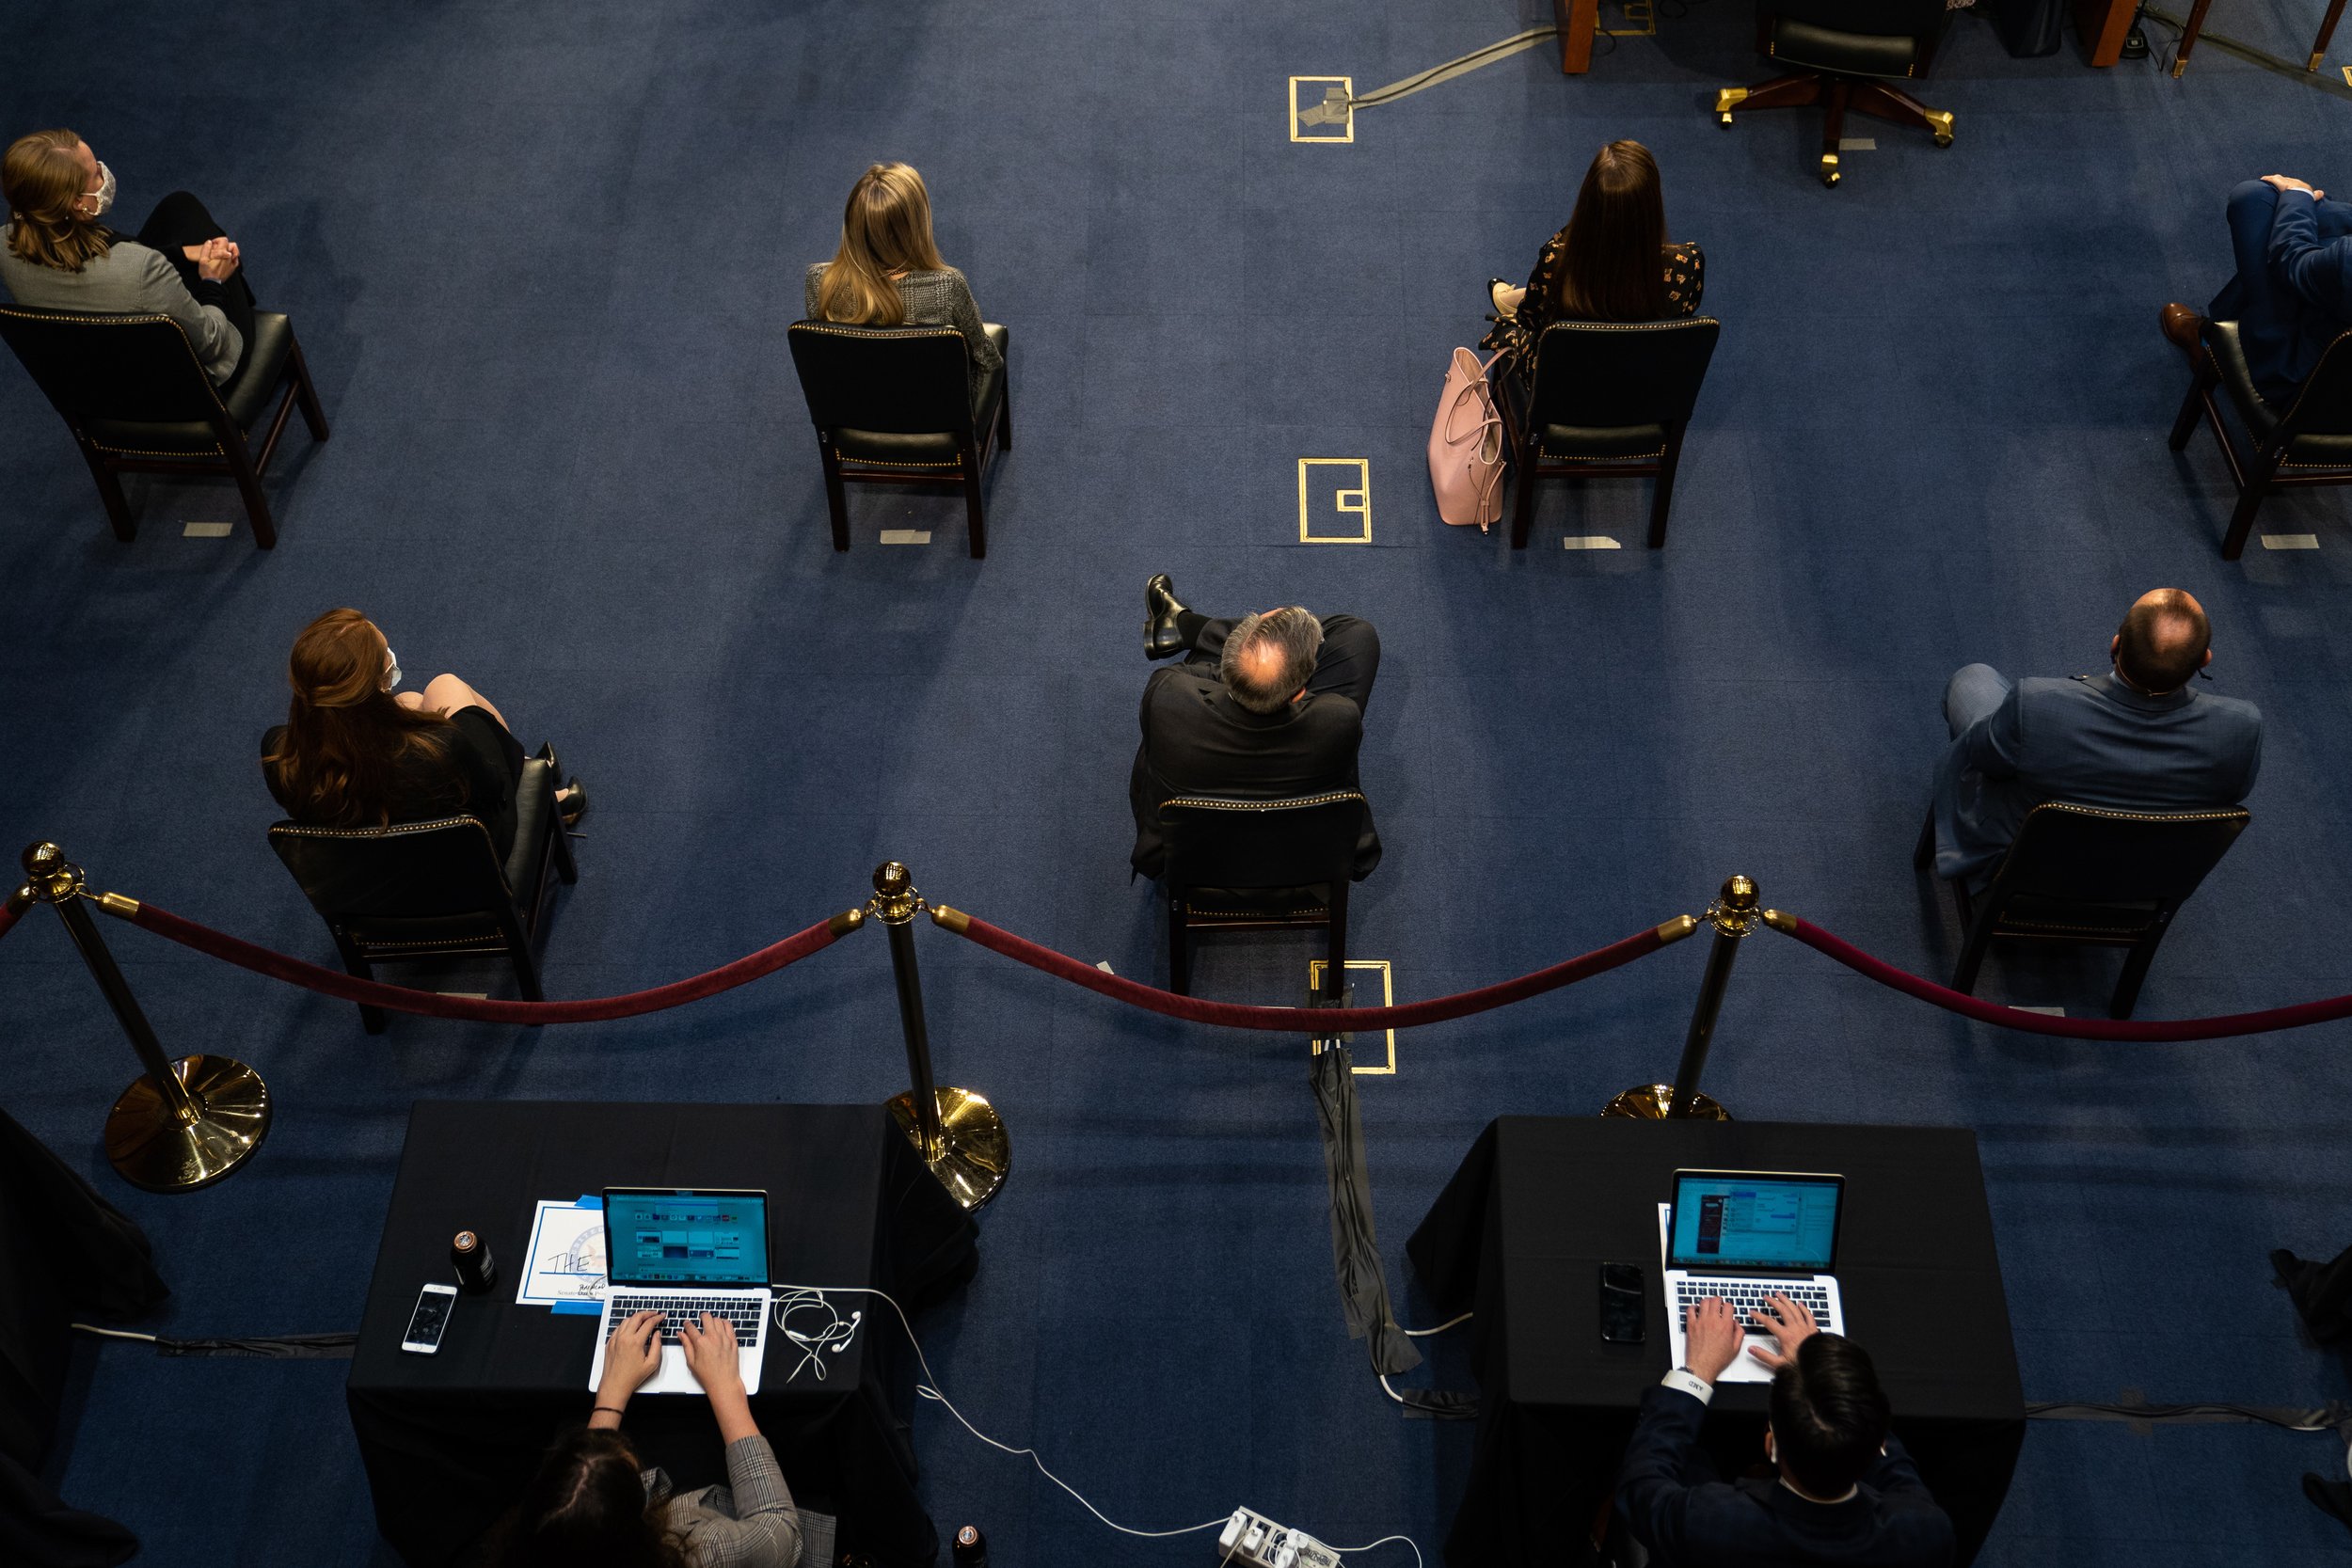  Social distancing seating during the Senate Judiciary Committee hearing for the Supreme Court nomination of Amy Coney Barrett.  